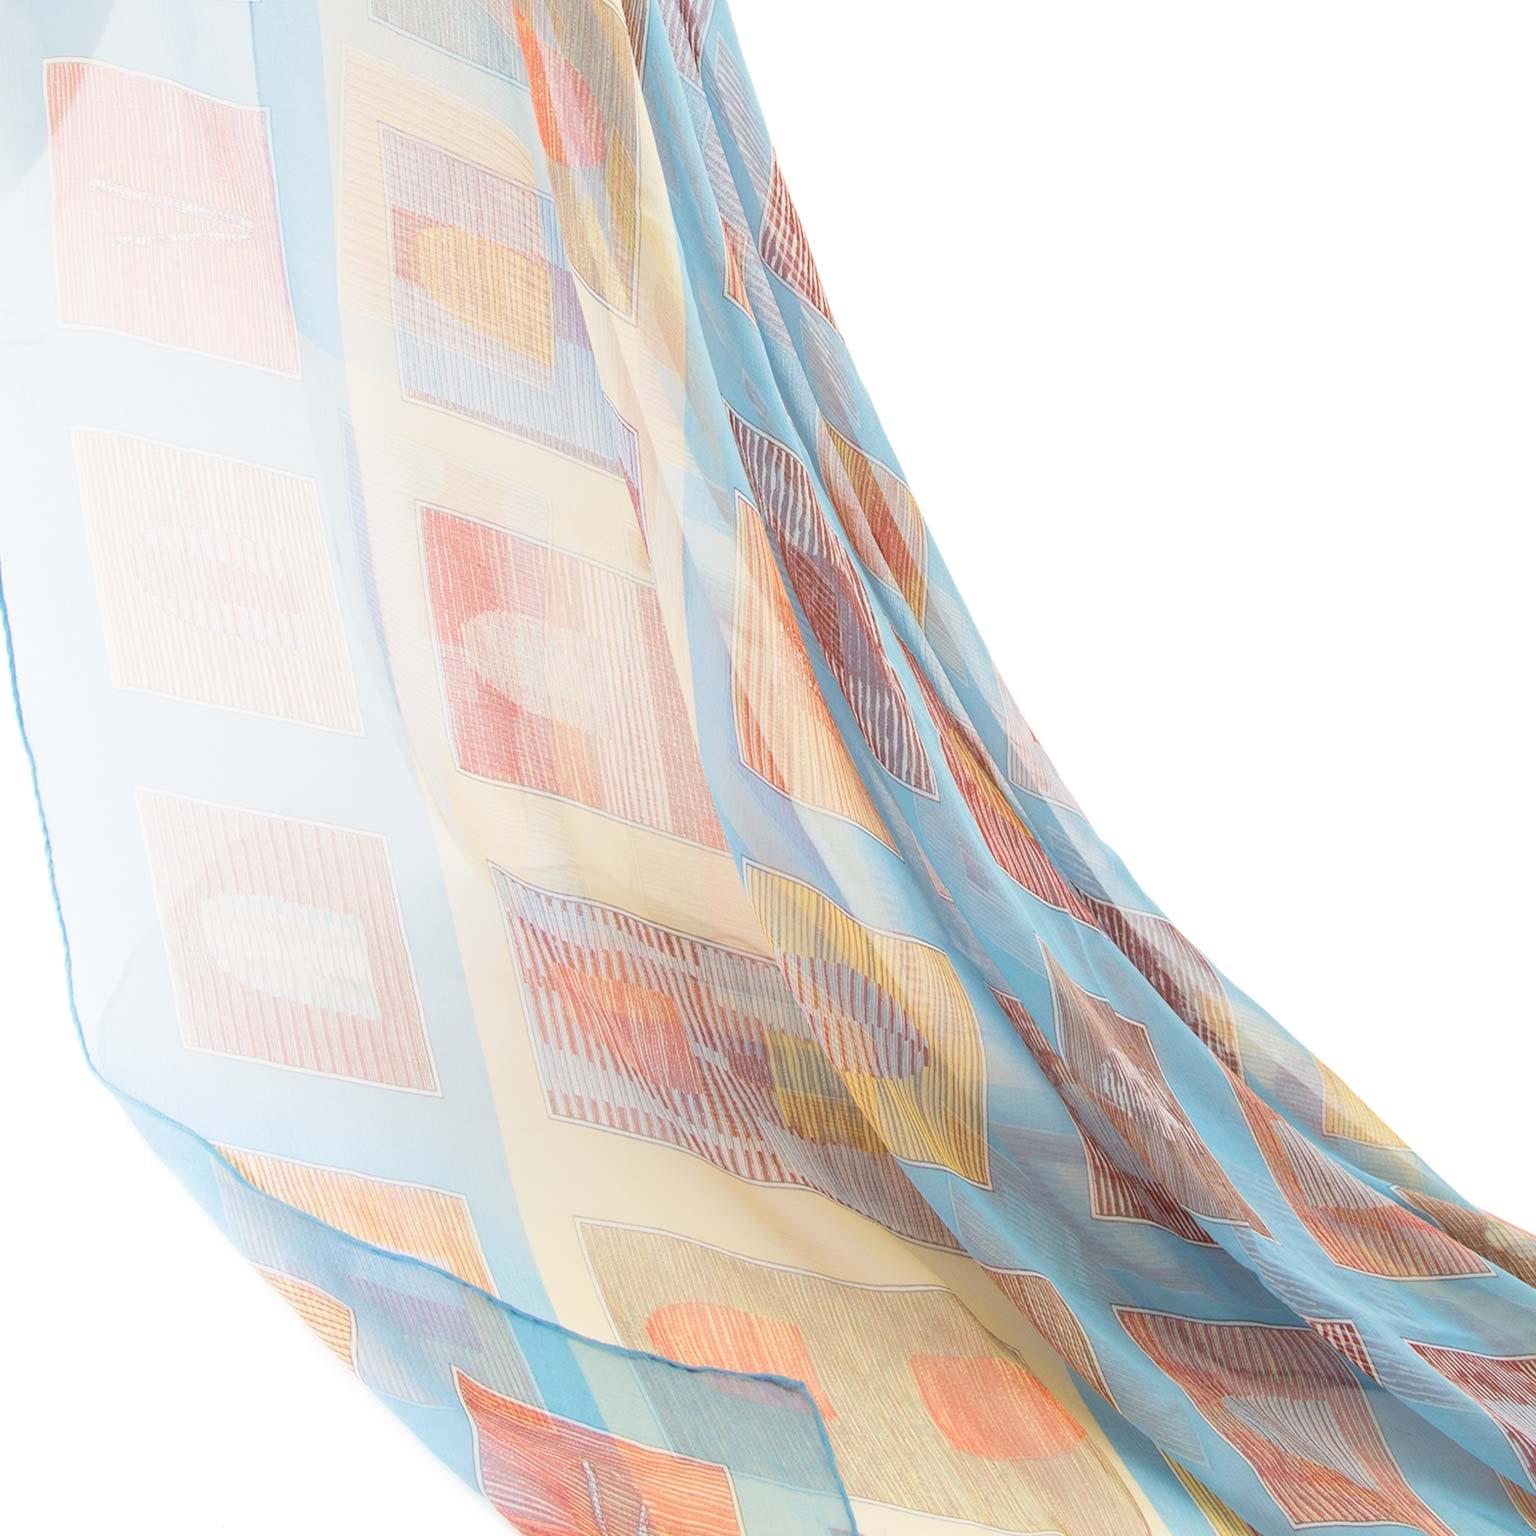 Good condition

Delvaux Mousseline Silk Squares Scarf

This gorgeous scarf by Delvaux is made from 100% mousseline silk.
The scarf features a square design with 'D' logo's in the center on a light blue background.